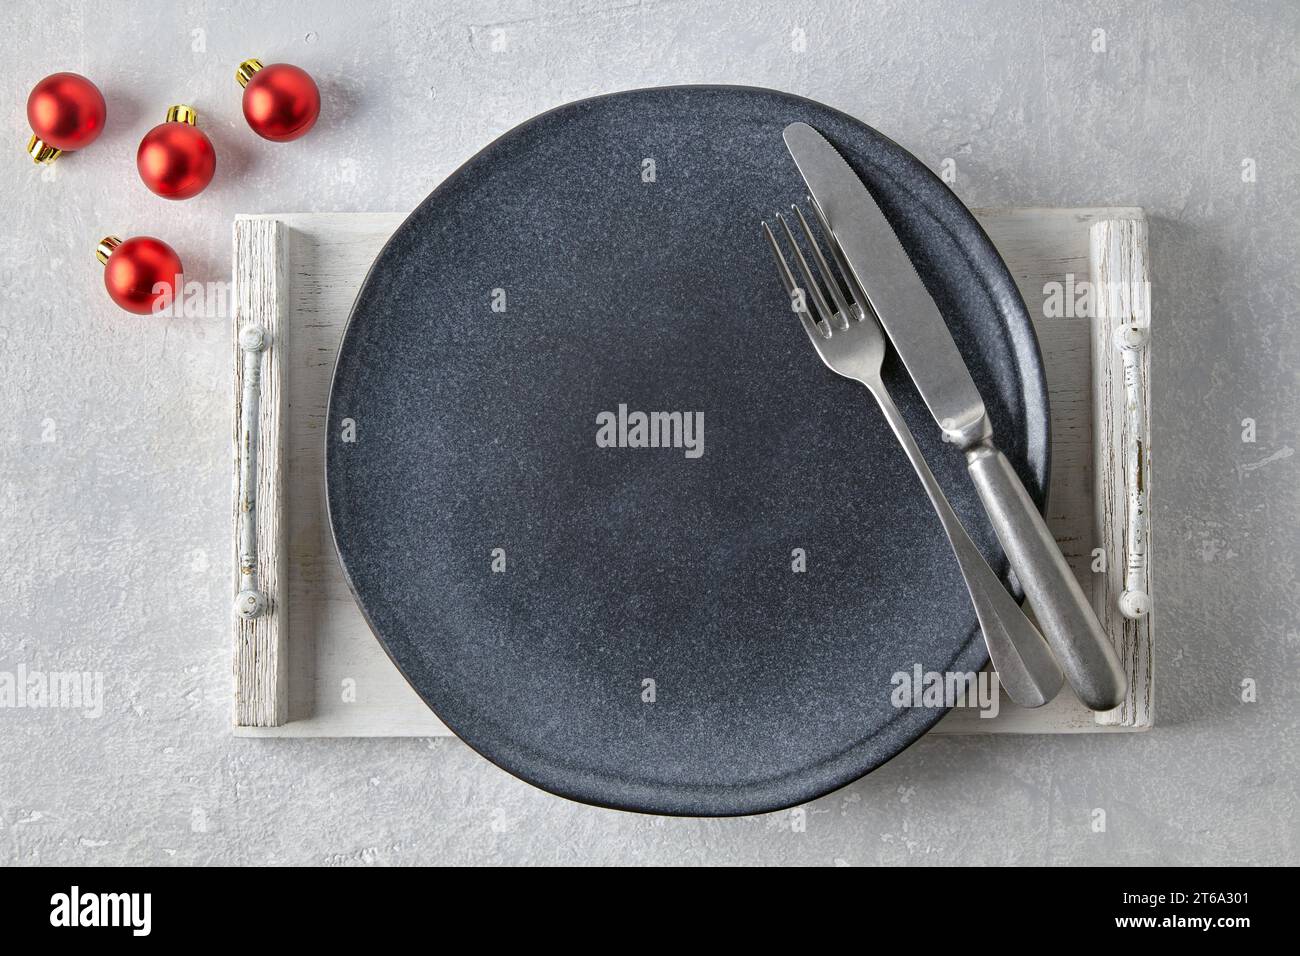 Empty dark gray plate with cutlery on a brown wooden tray on a gray concrete table surrounded by red Christmas balls. Template for presenting food in Stock Photo